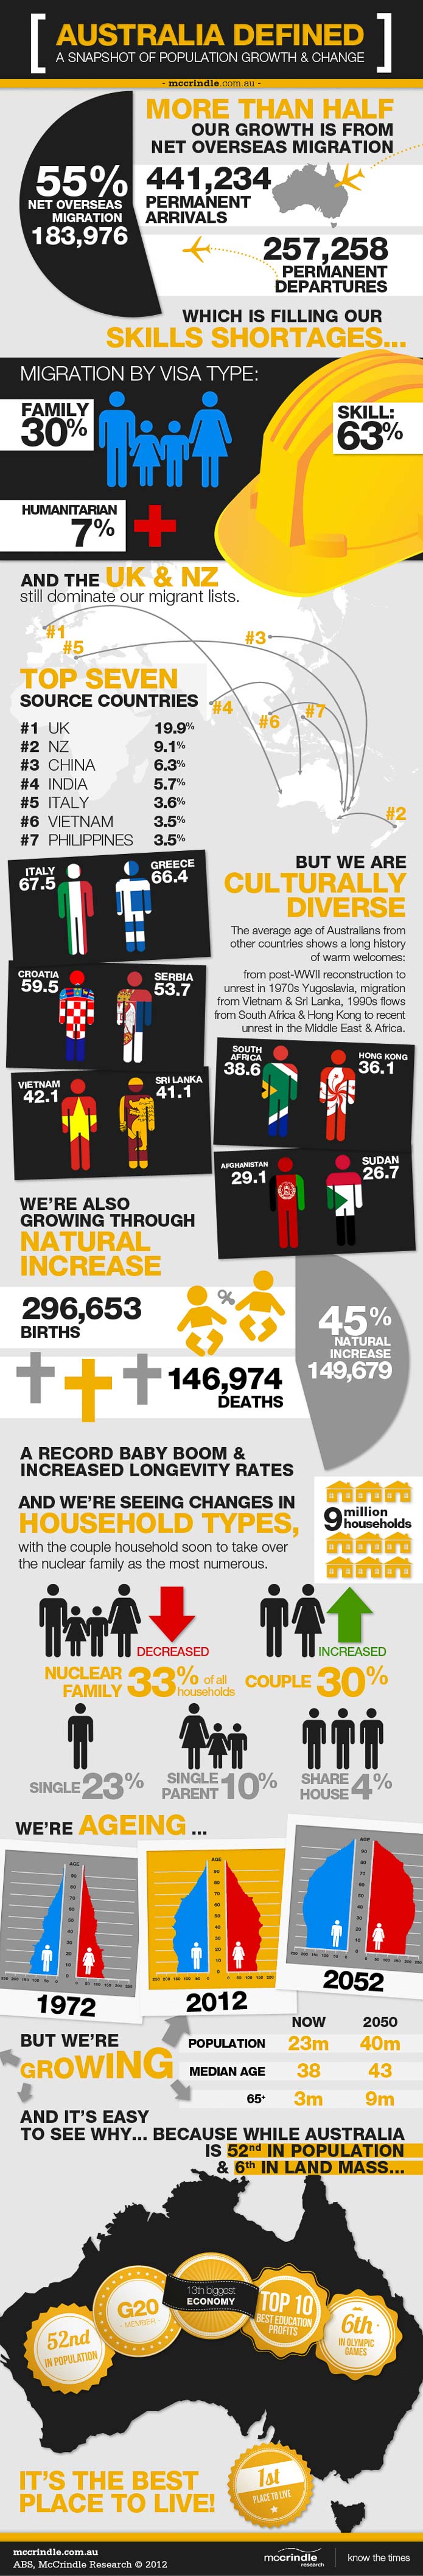 Australia Defined Infographic: A snapshot of population growth and change